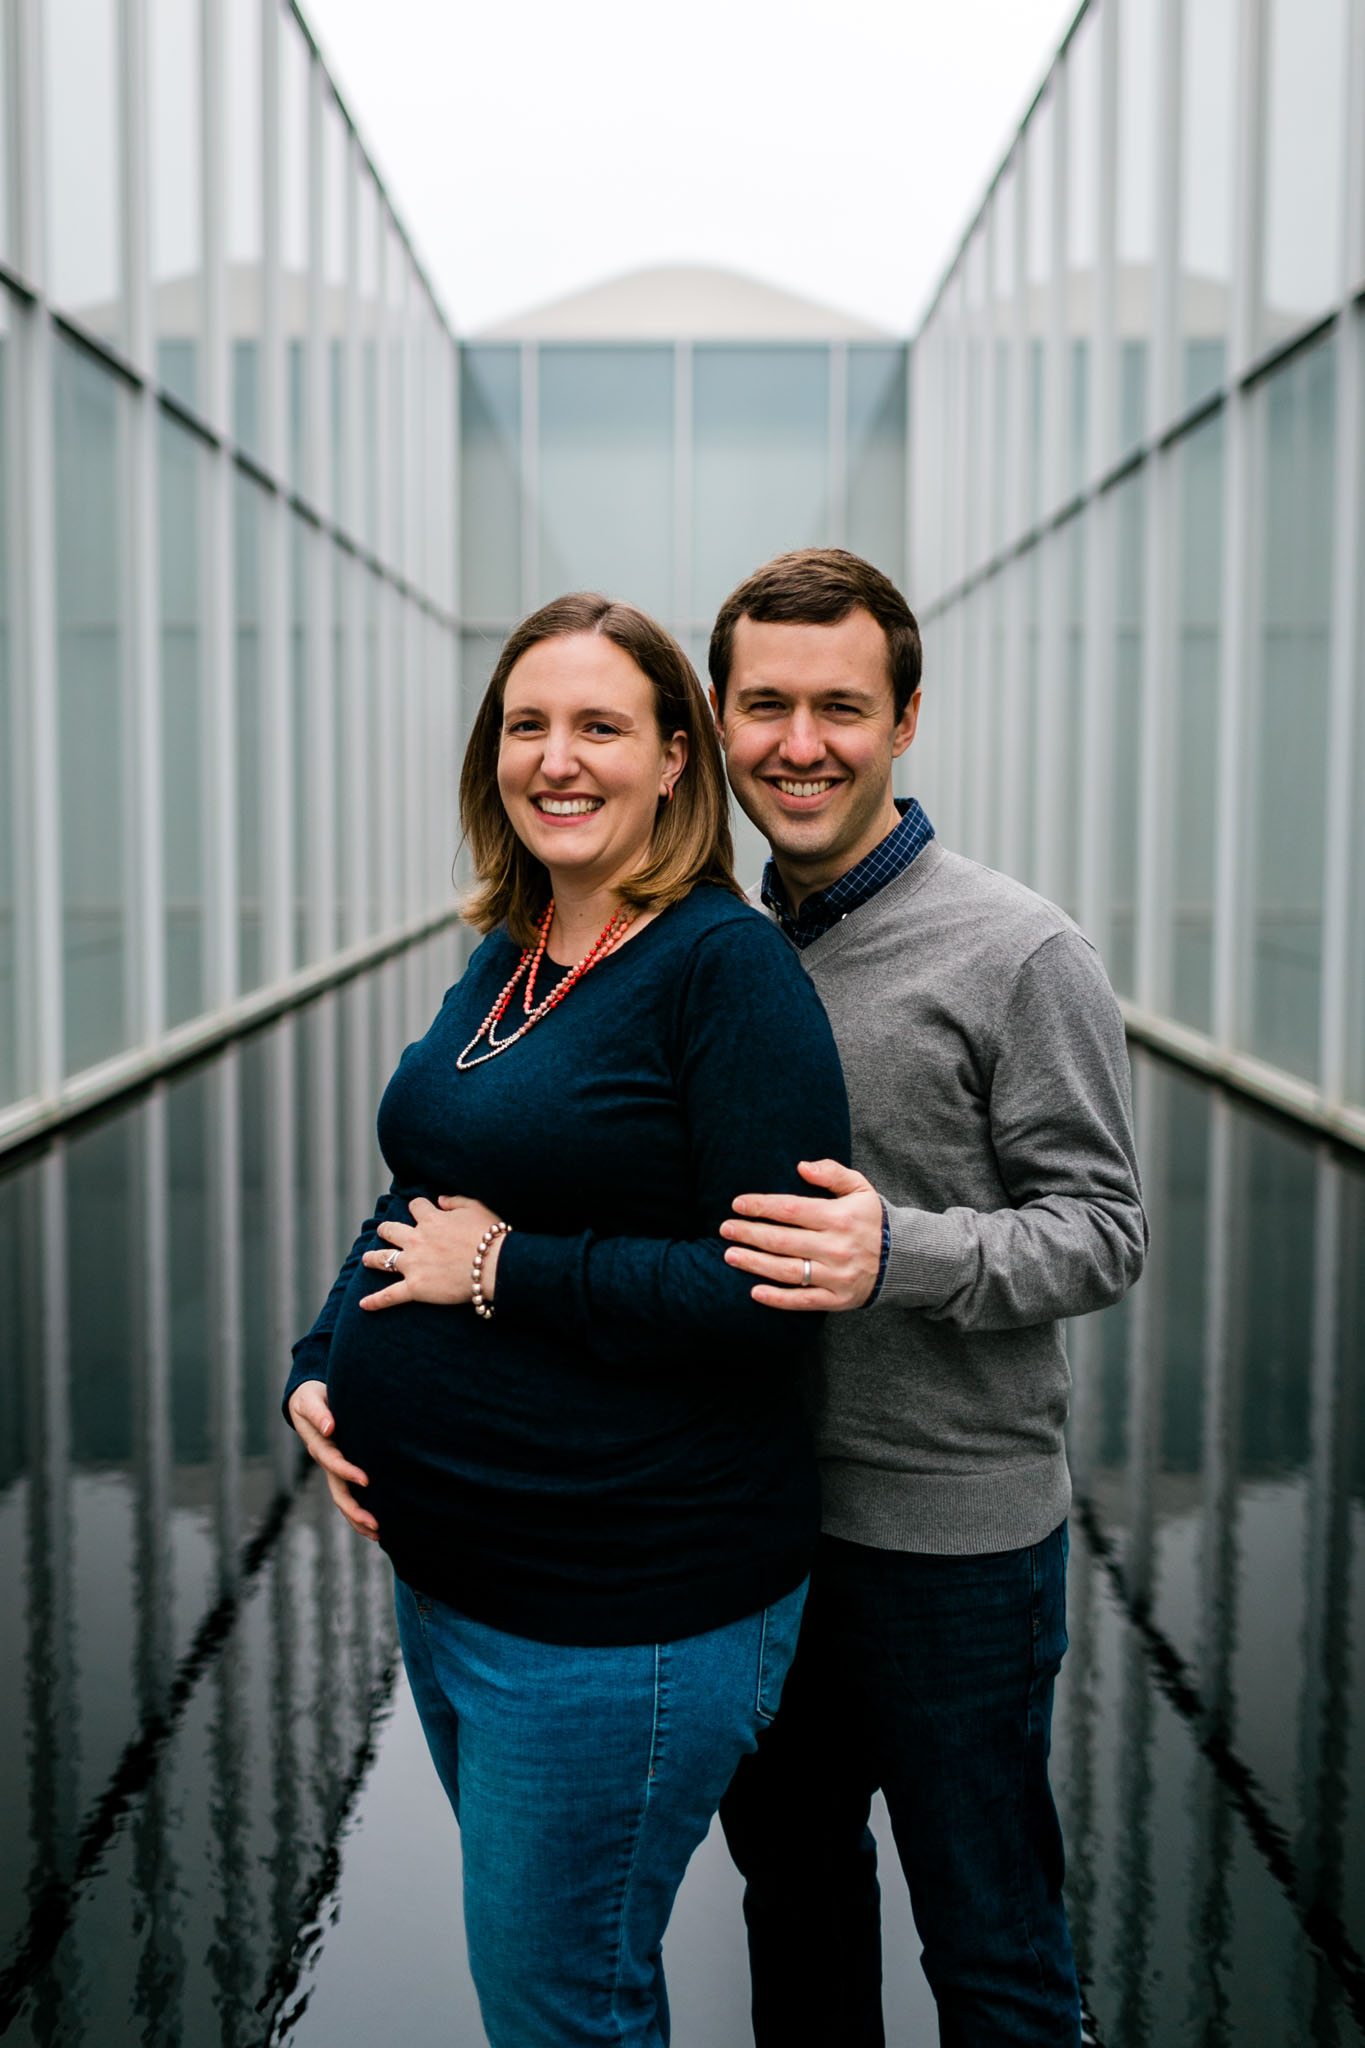 Modern maternity photo at NCMA | Raleigh Maternity Photographer | By G. Lin Photography